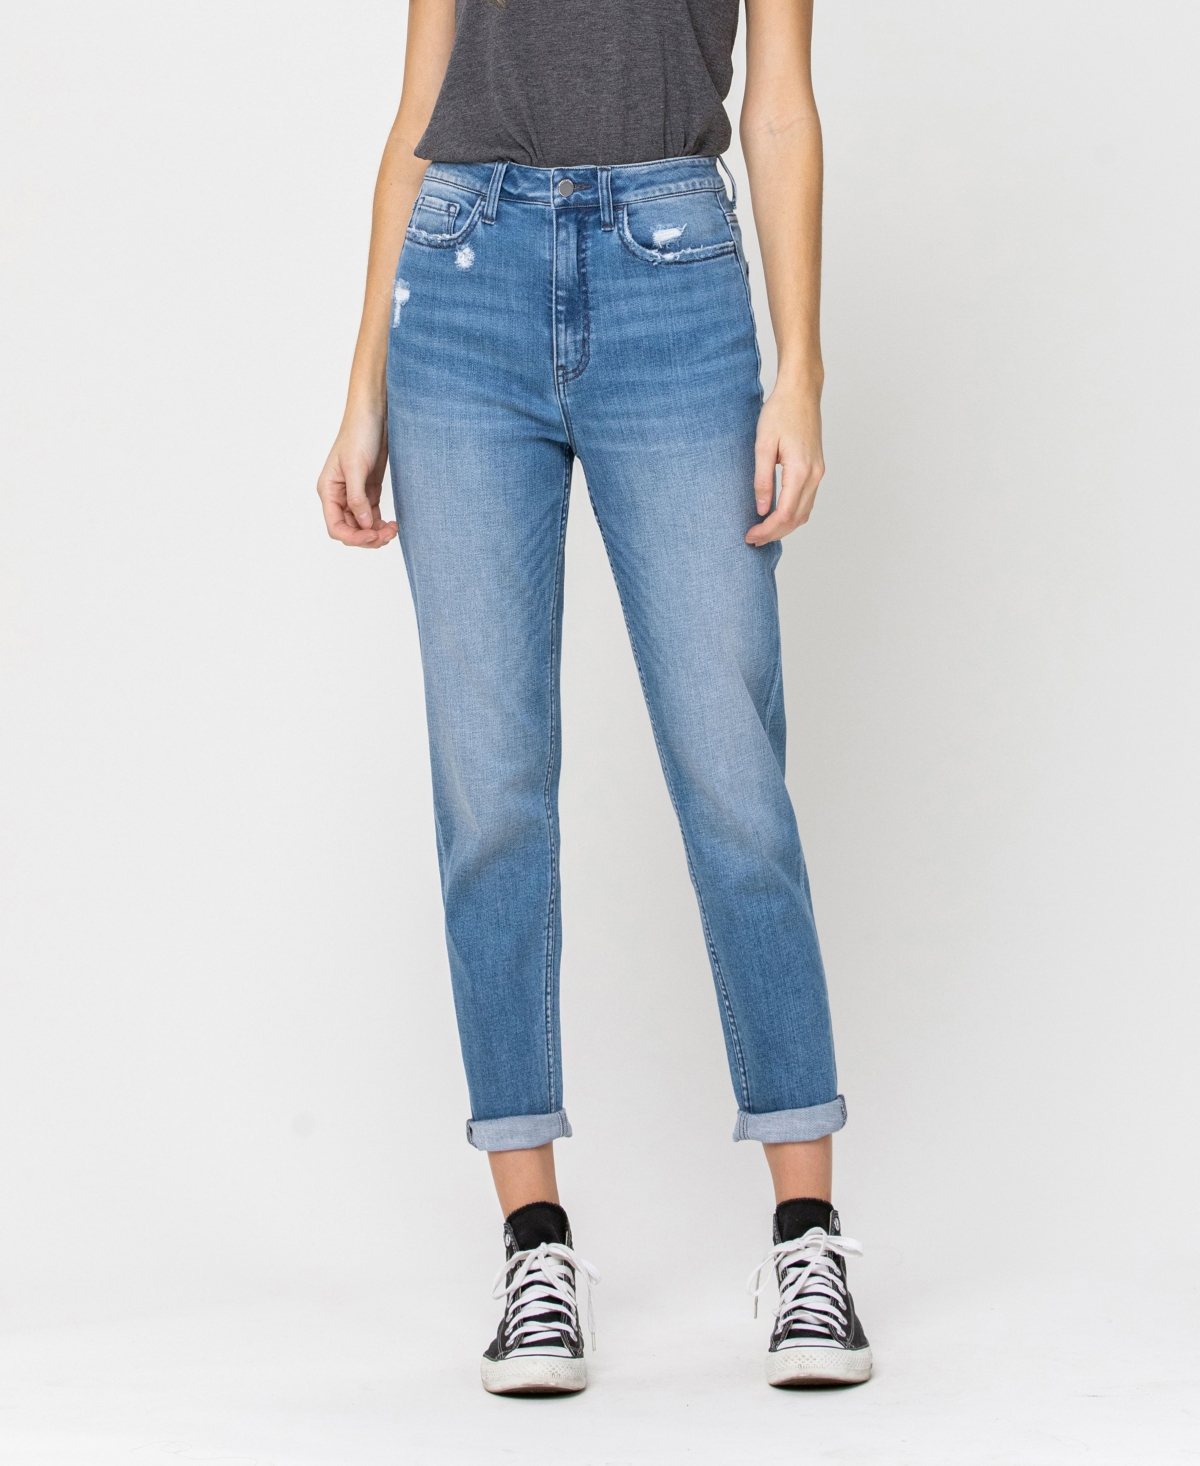  Women's Stretch Roll Up Mom Jeans